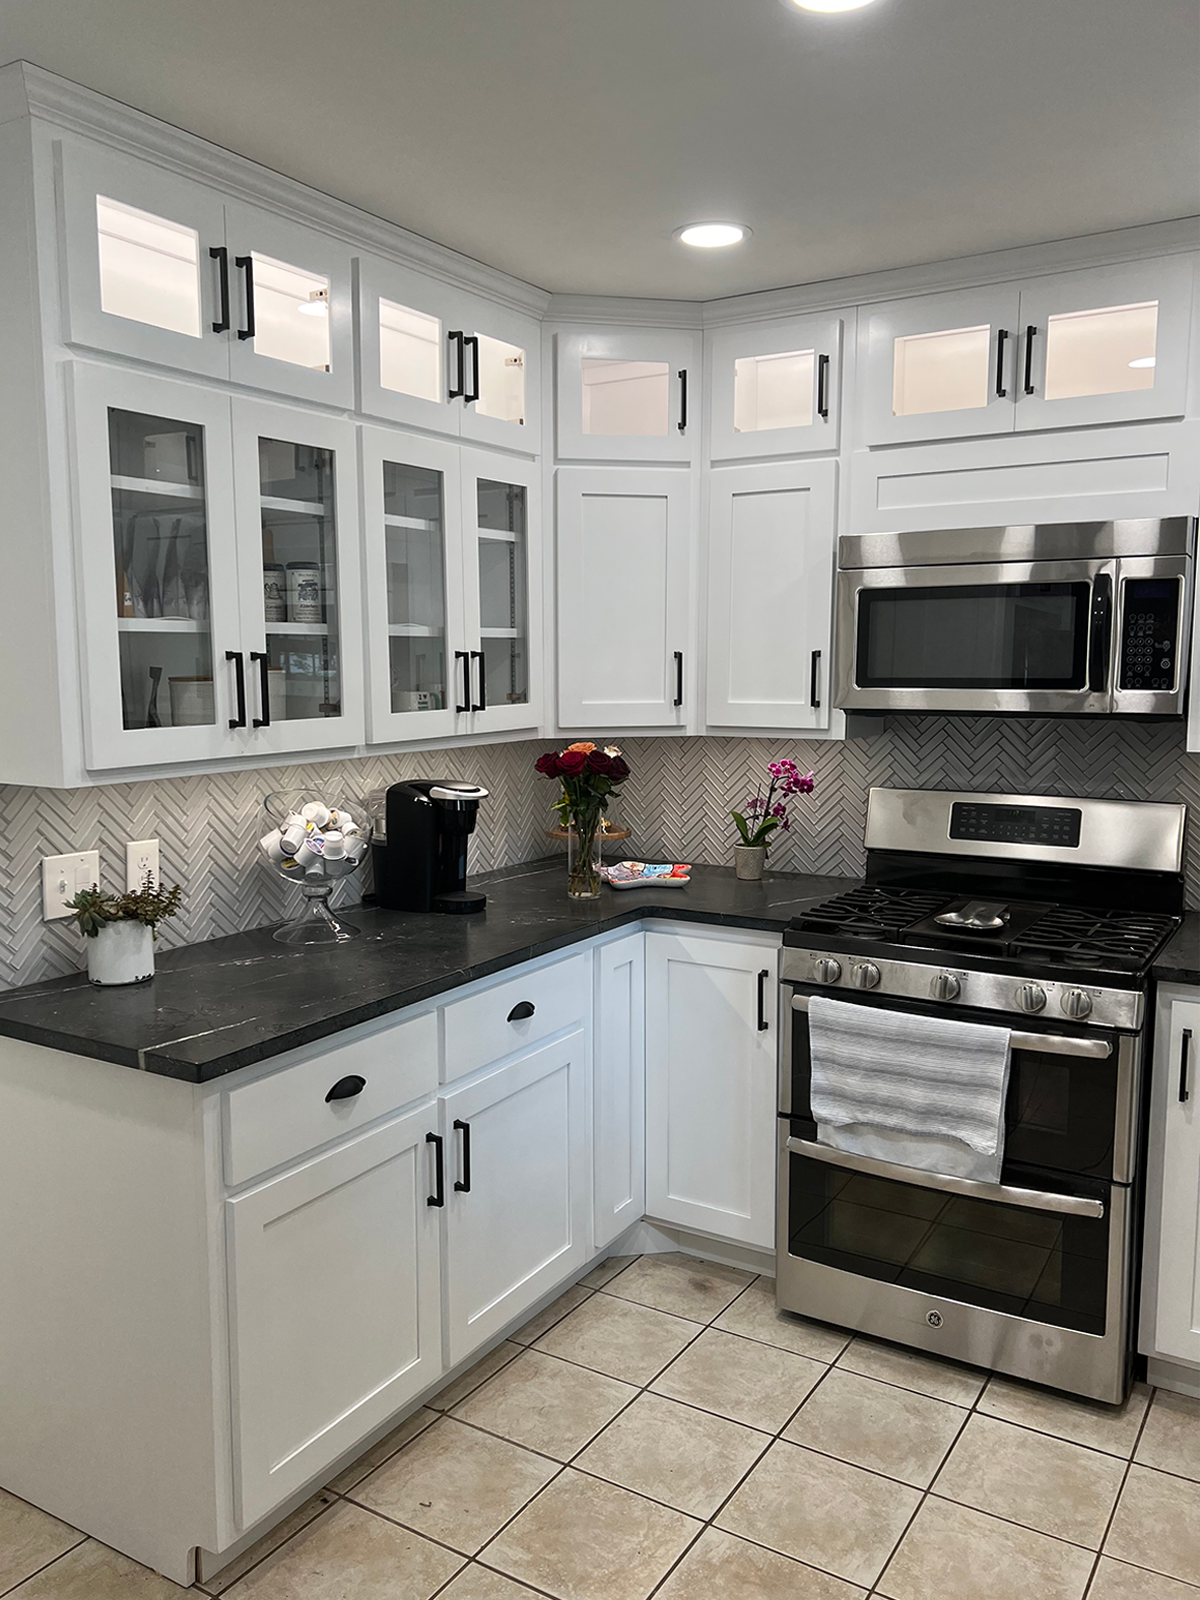 Kitchen cabinets by S and C Cabinets